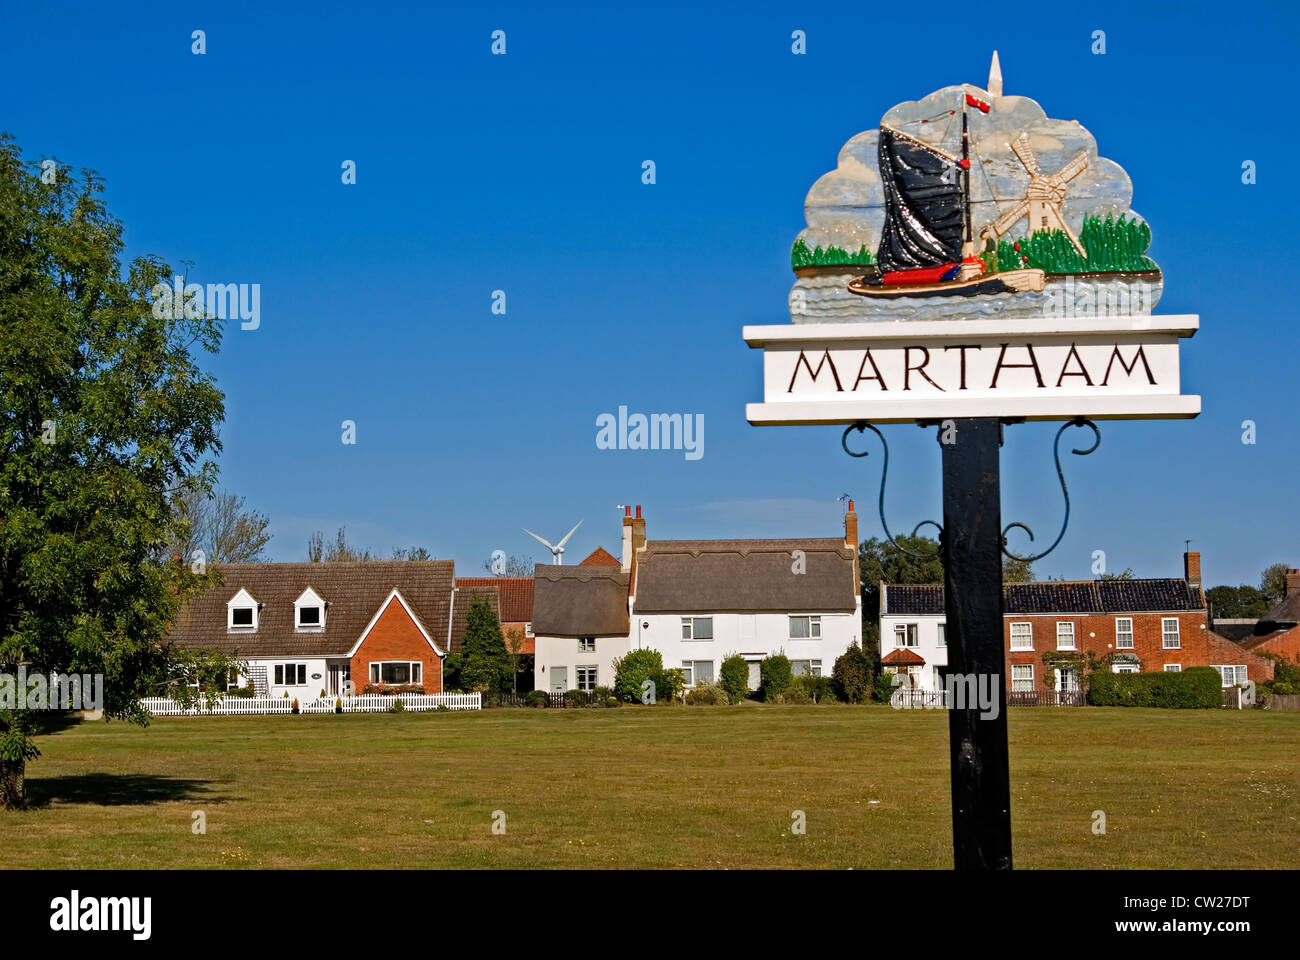 The Village Green at Martham in Norfolk, with its Thatched Cottages and Village Sign. Stock Photo